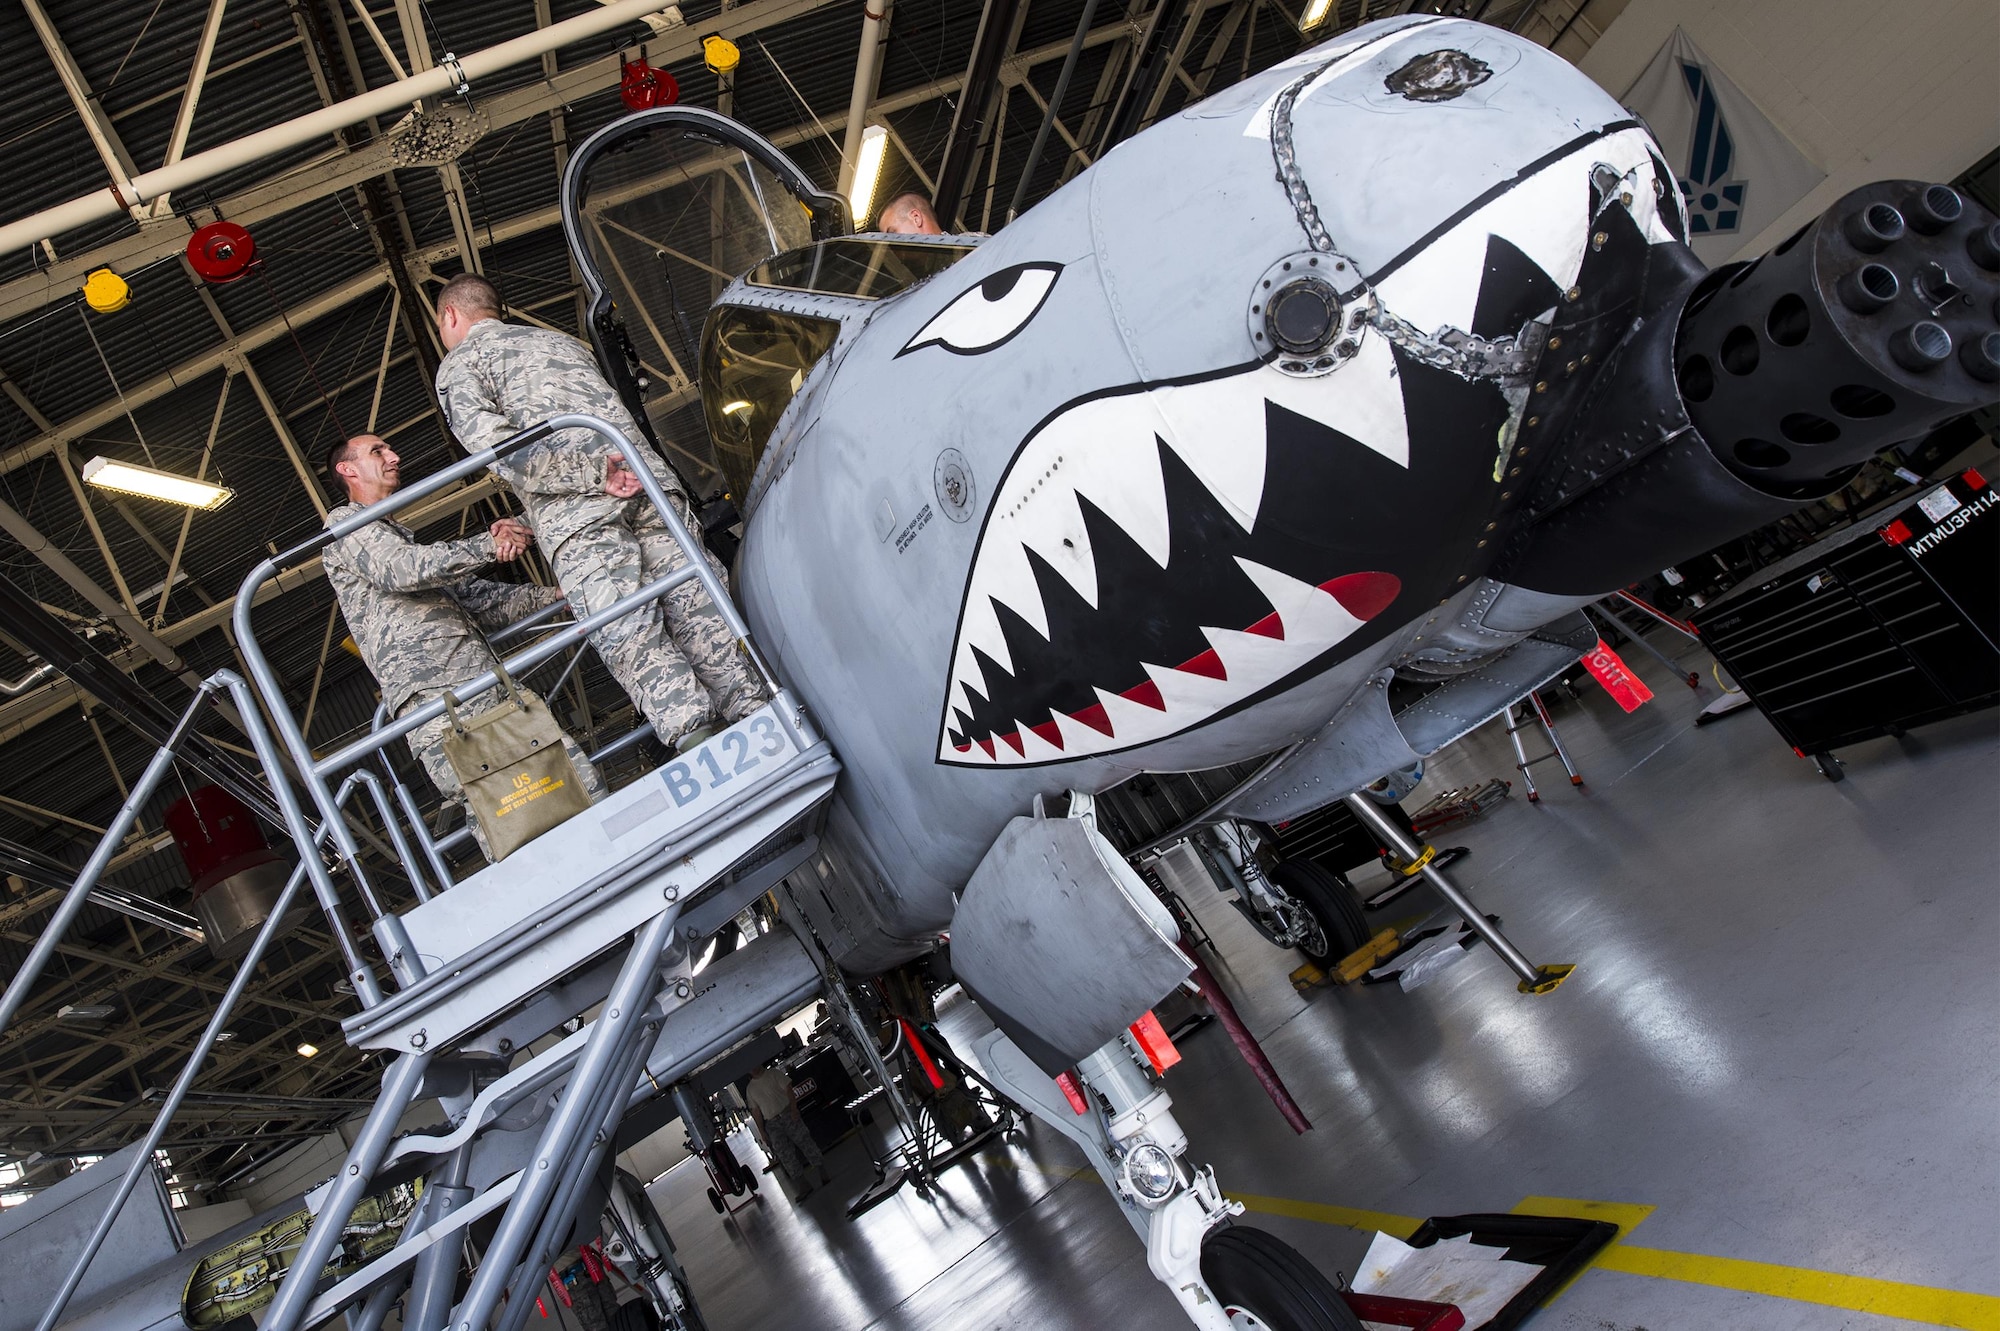 U.S. Air Force Senior Master Sgt. Dillon Johnson, 74th Aircraft Maintenance Unit assistant superintendent, explains the A-10C Thunderbolt II’s capabilities and maintenance procedures to Maj. Gen. Scott Zobrist, Ninth Air Force commander, June 28, 2016, at Moody Air Force Base, Ga. During Zobrist’s visit, he toured the 23d Maintenance and Fighter Groups and the 347th Rescue Group. (U.S. Air Force photo by Senior Airman Ceaira Young/Released)